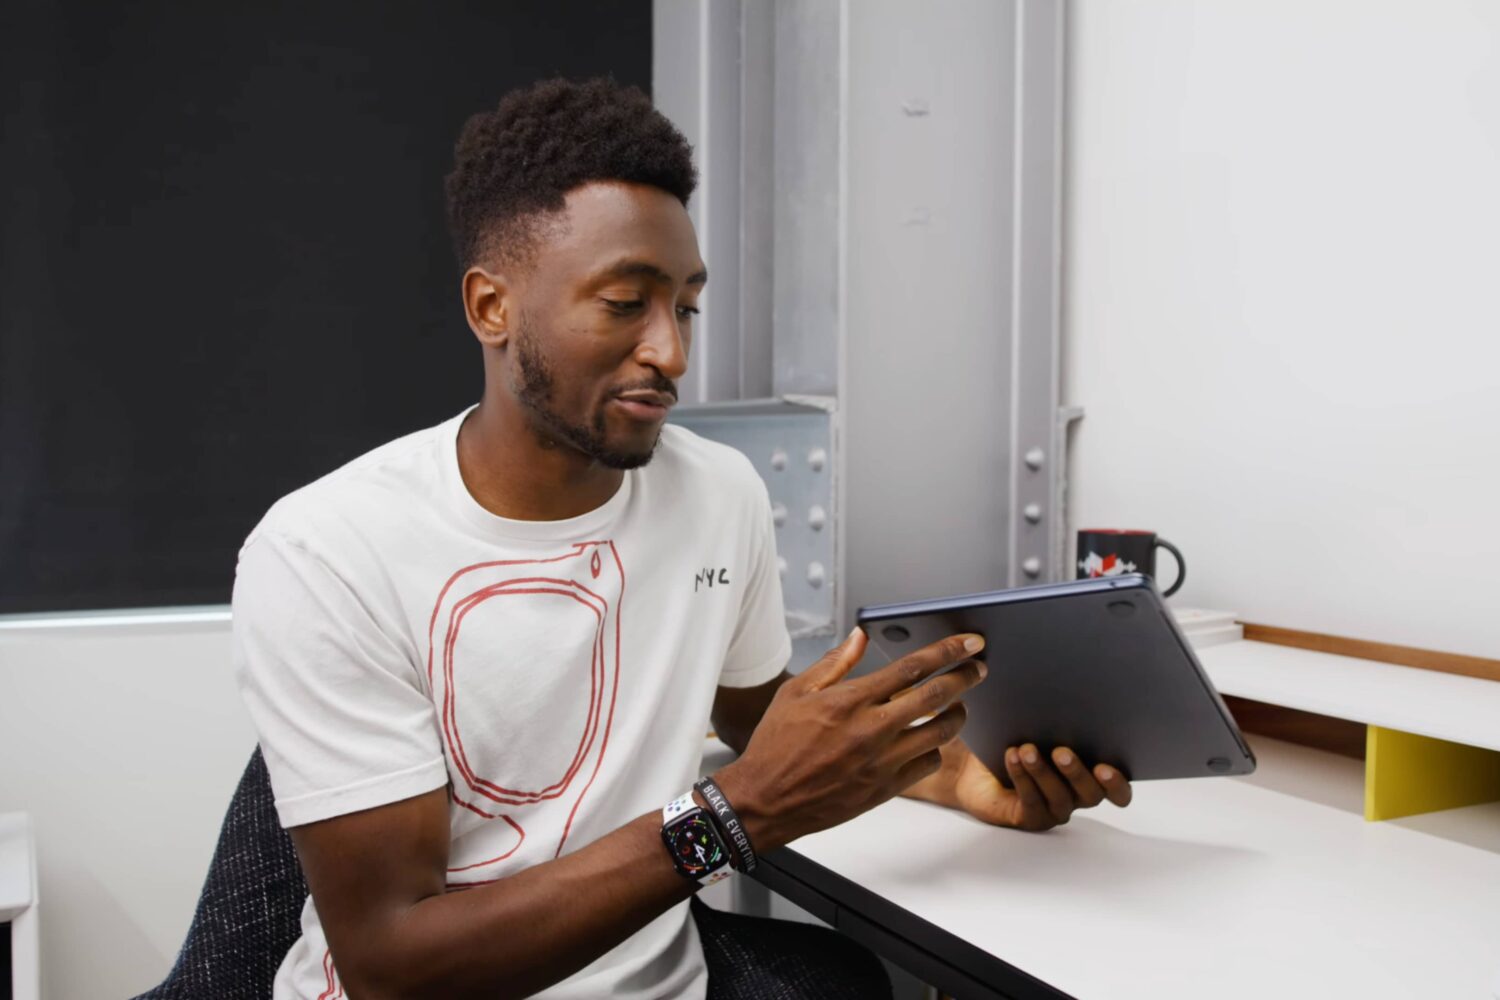 YouTuber Marques Brownlee is in his studio, holding Apple's MacBook Air laptop in the Midnight color and inspecting the nicks around USB-C ports